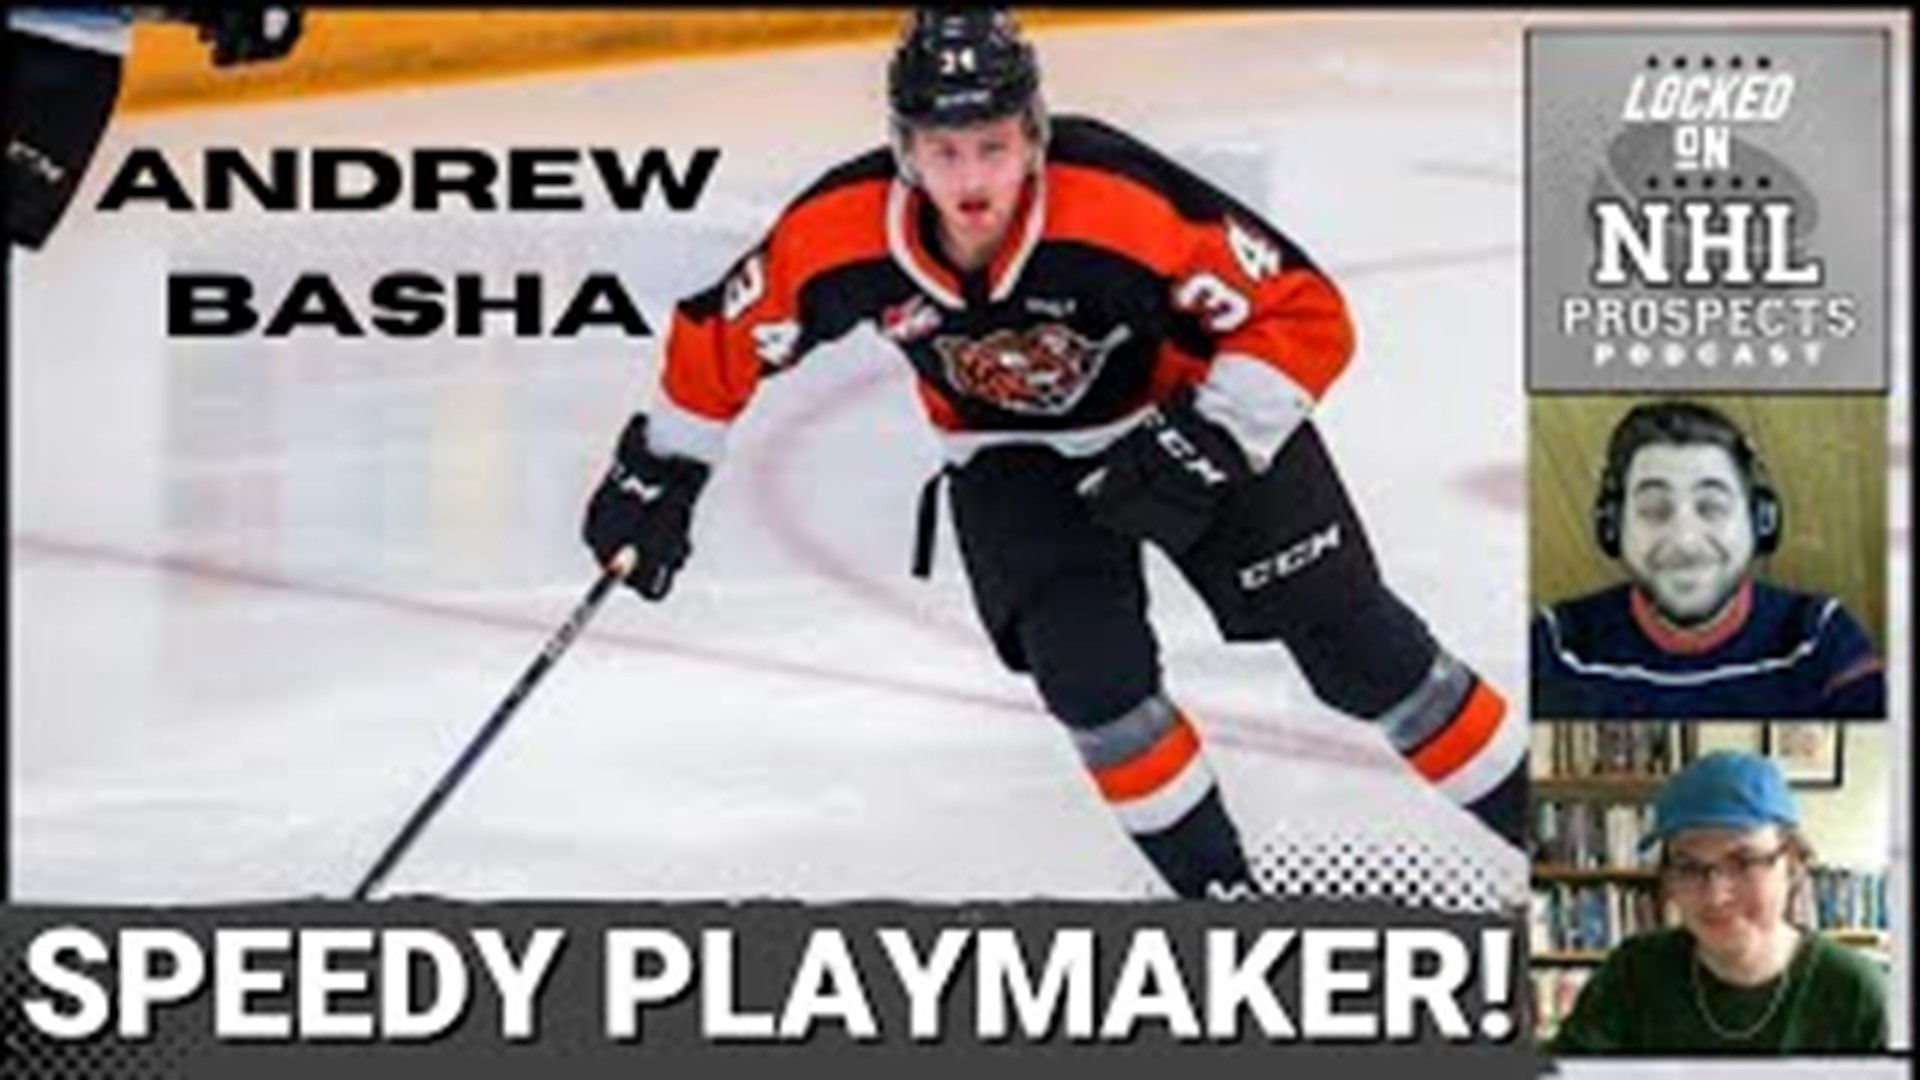 In this episode of the Prospect Spotlight series, our scouts take a half-hour deep dive into the speedy playmaking winger with checking ability: Andrew Basha!